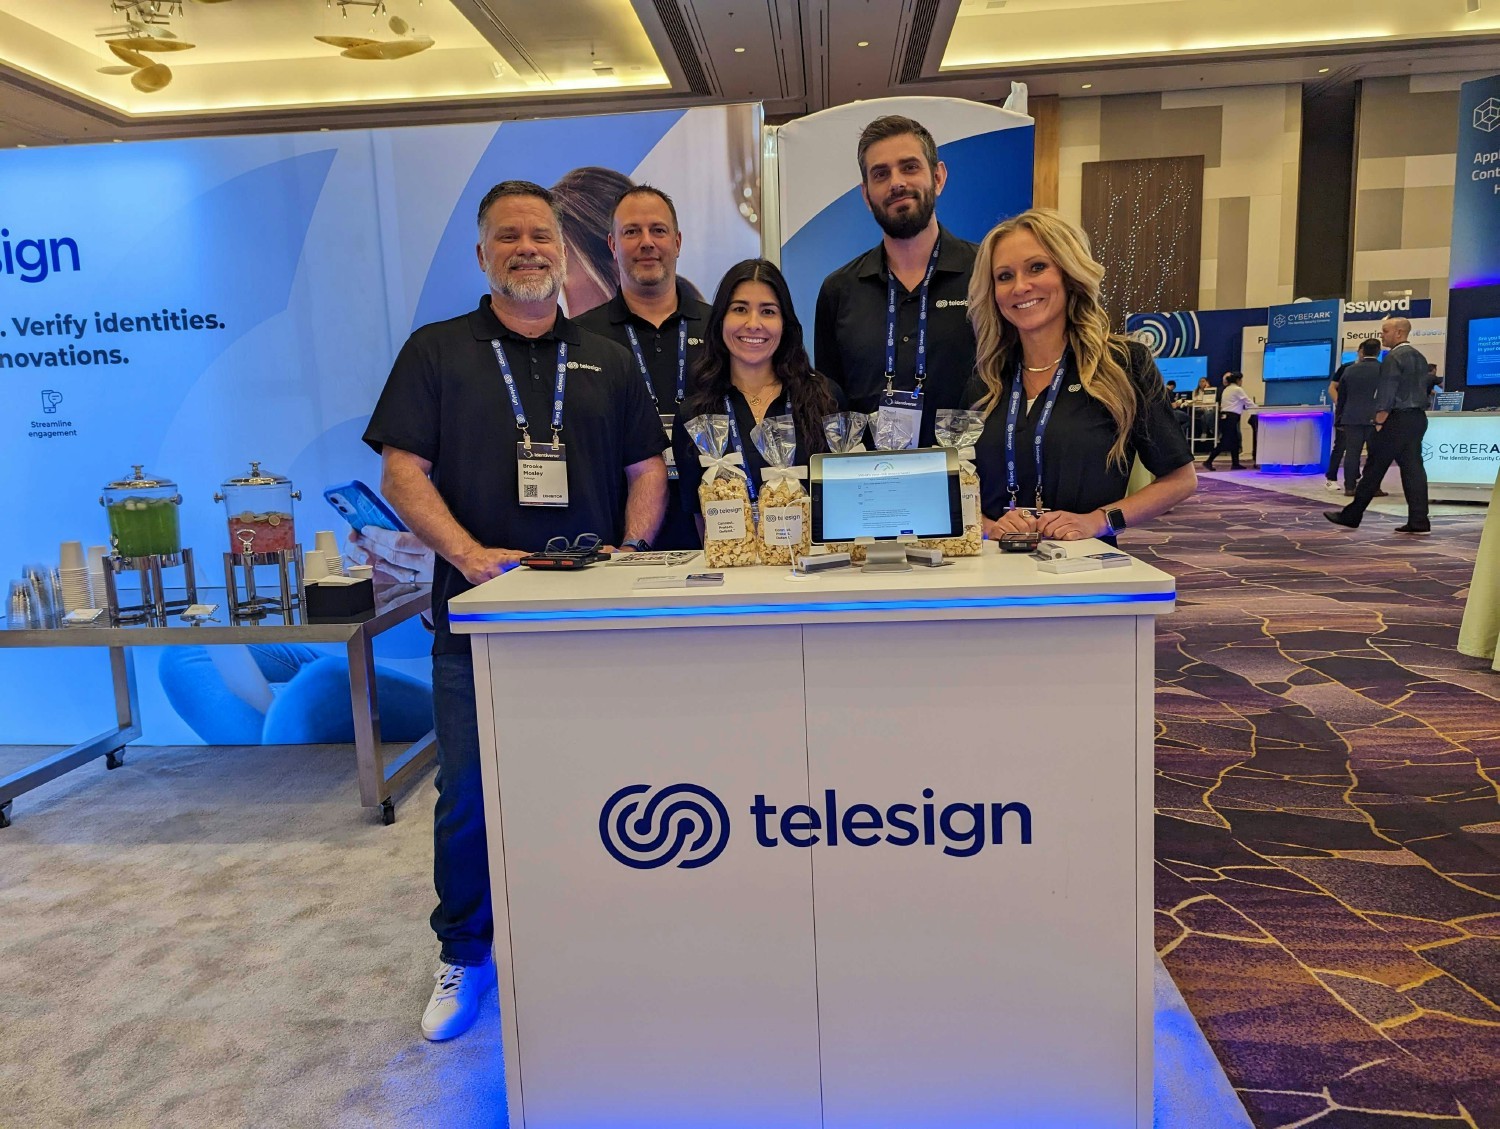 Telesign's team attends a conference to promote our brand and products.